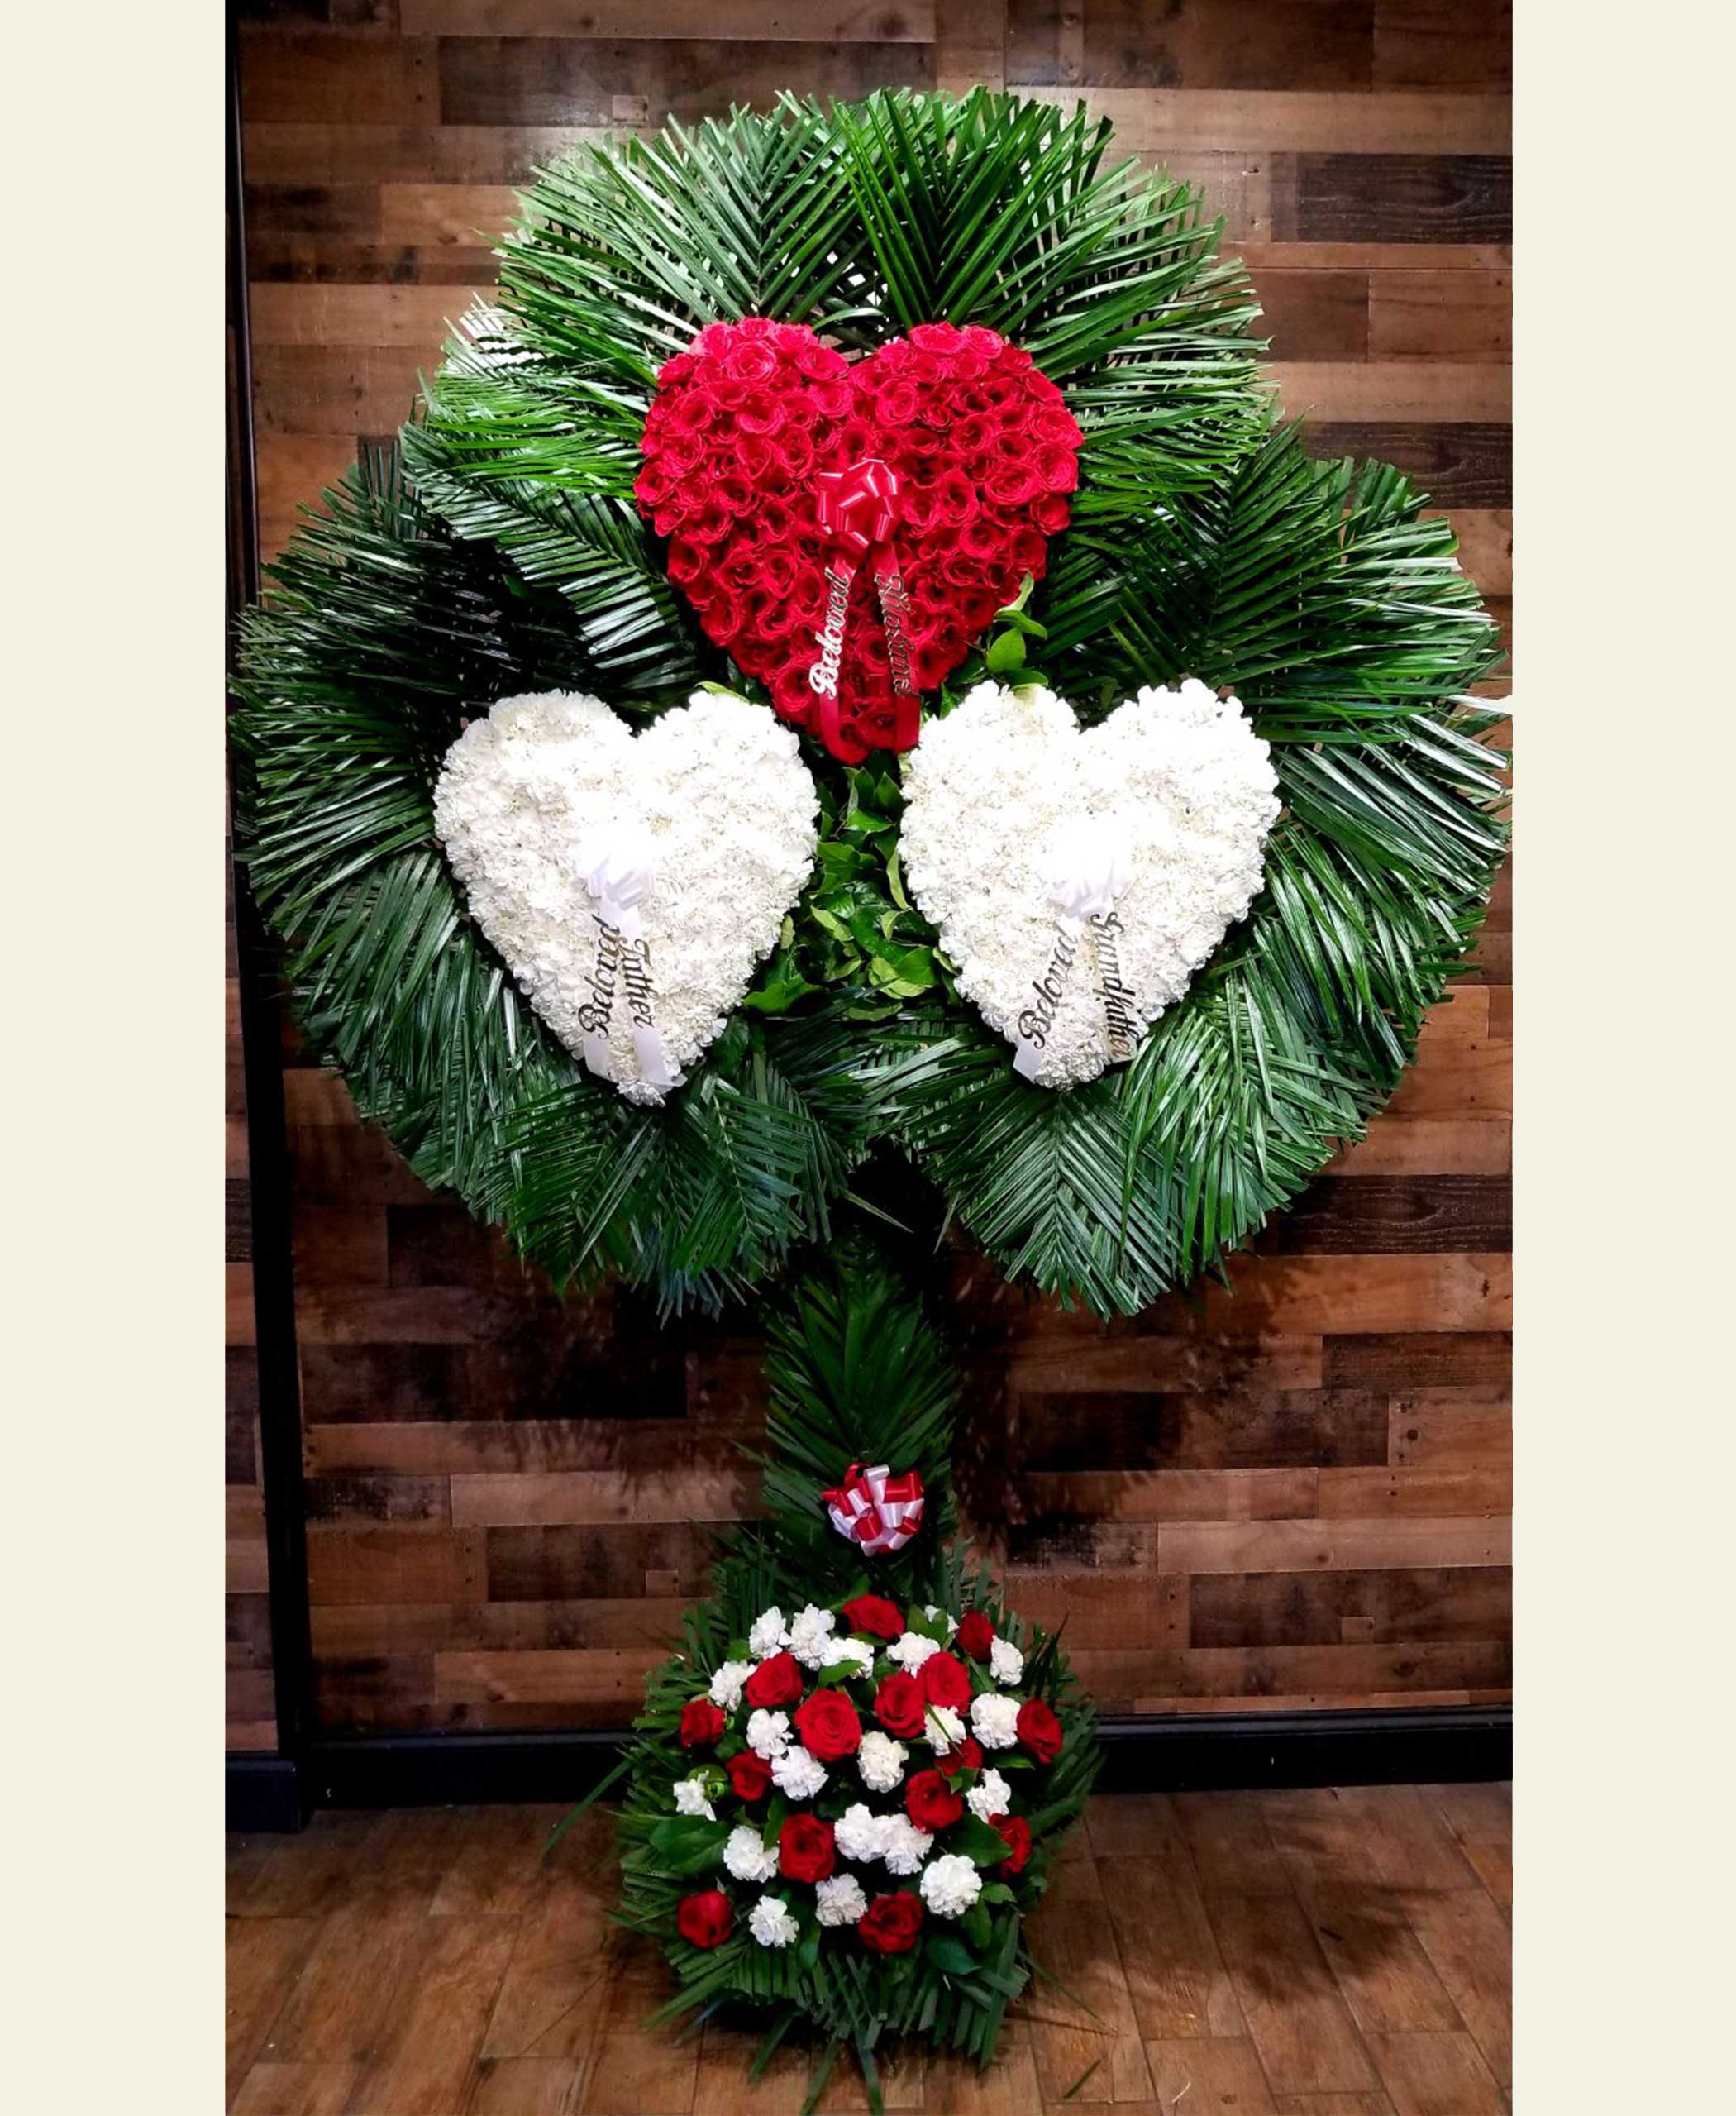 Top Ways To Make Your Funeral Arrangements More Personal - Floral Fantasy US